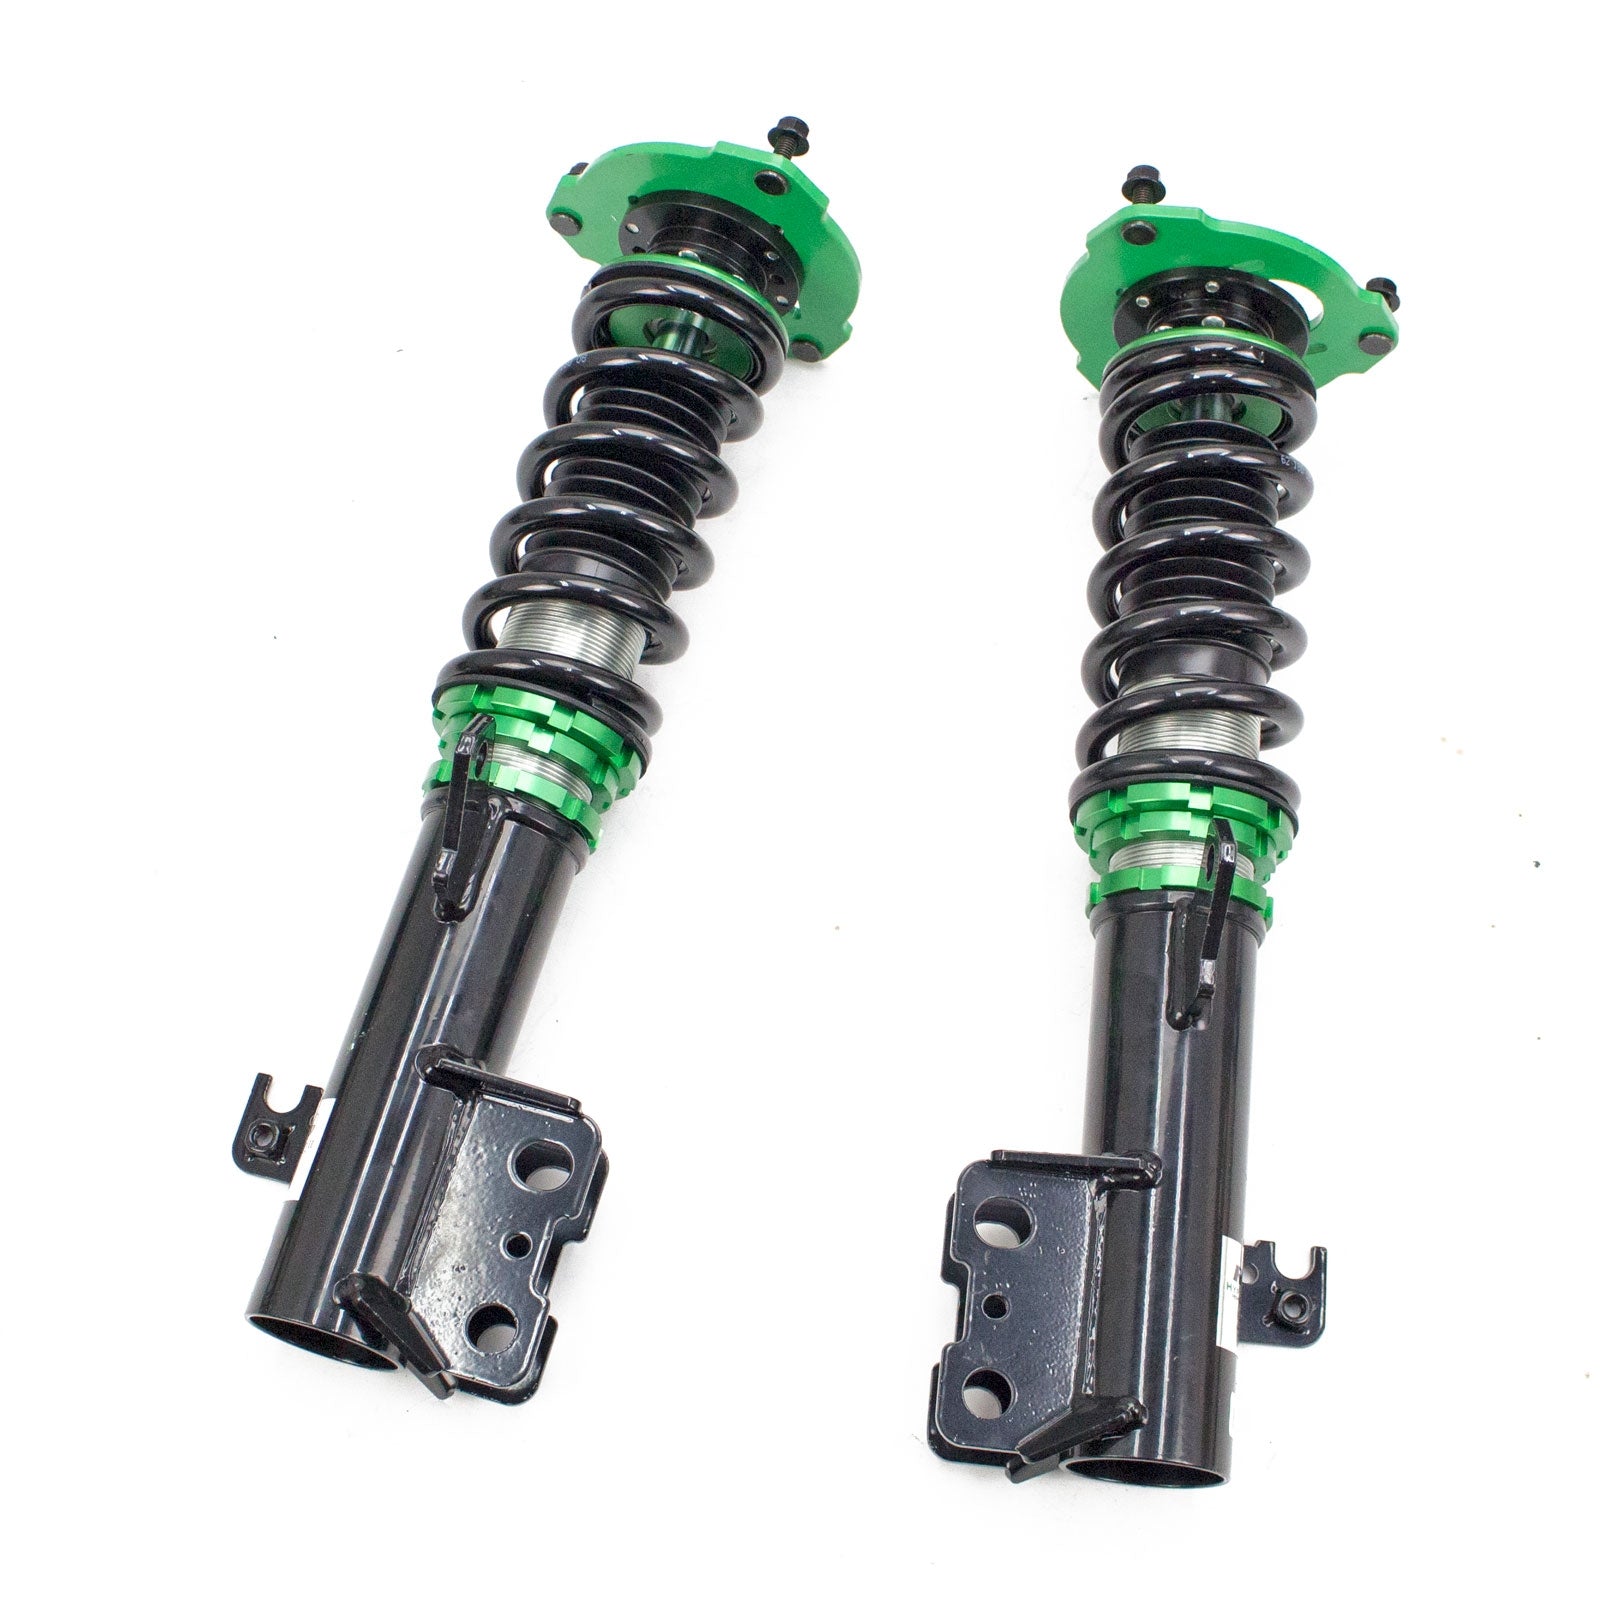 Rev9 Compatible With Toyota Matrix 1.8L FWD (E140) 2009-14 Hyper-Street II Coilover Kit w/ 32-Way Damping Force Adjustment